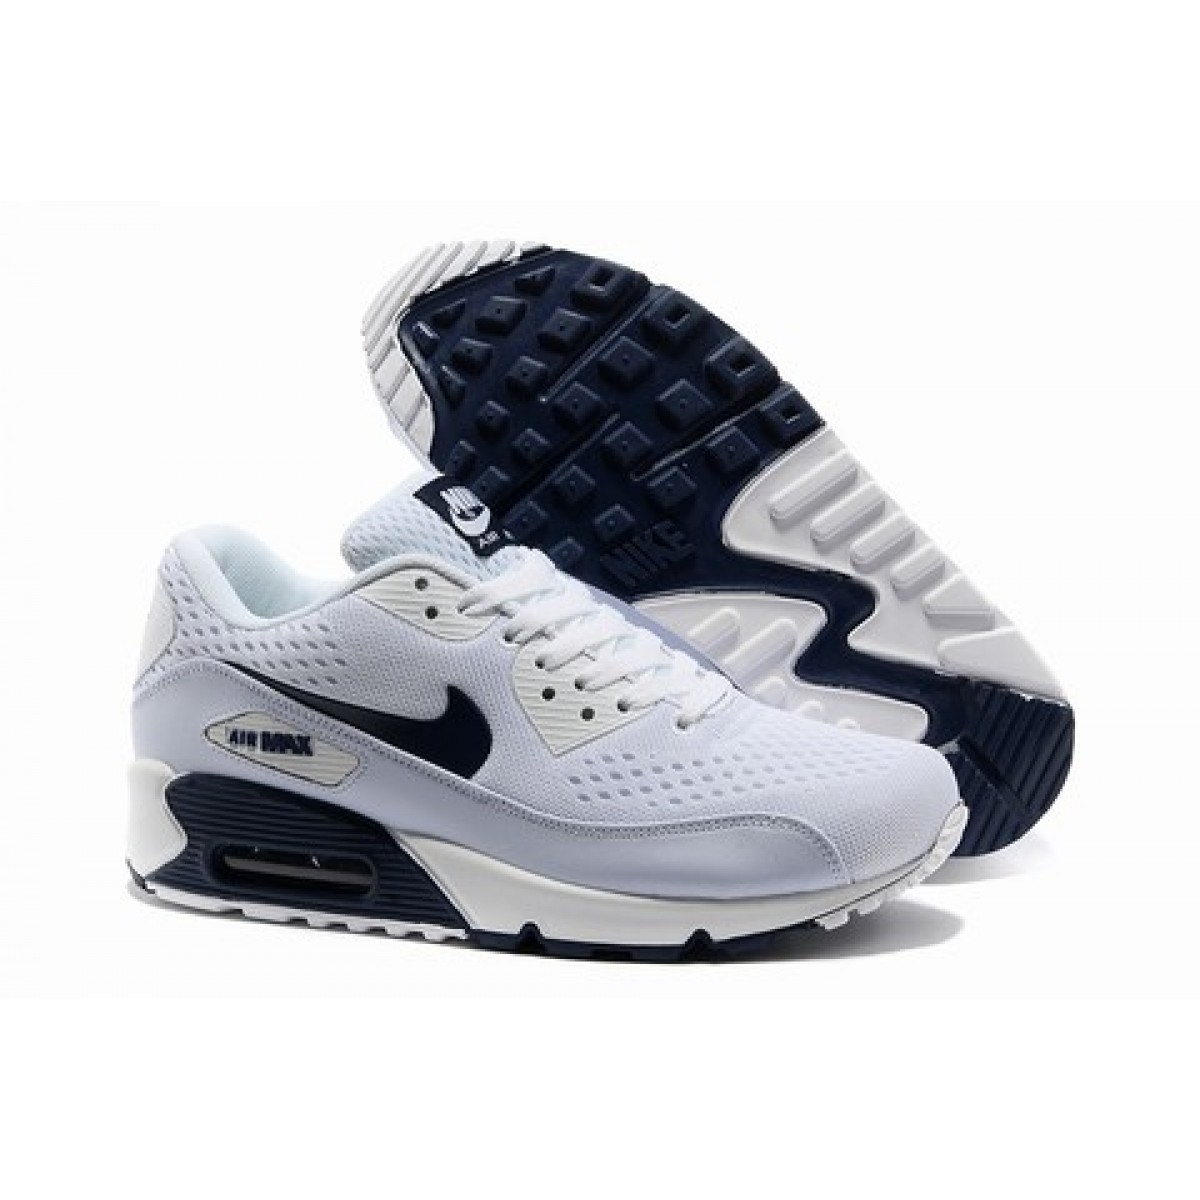 nike air max 90 soldes homme online